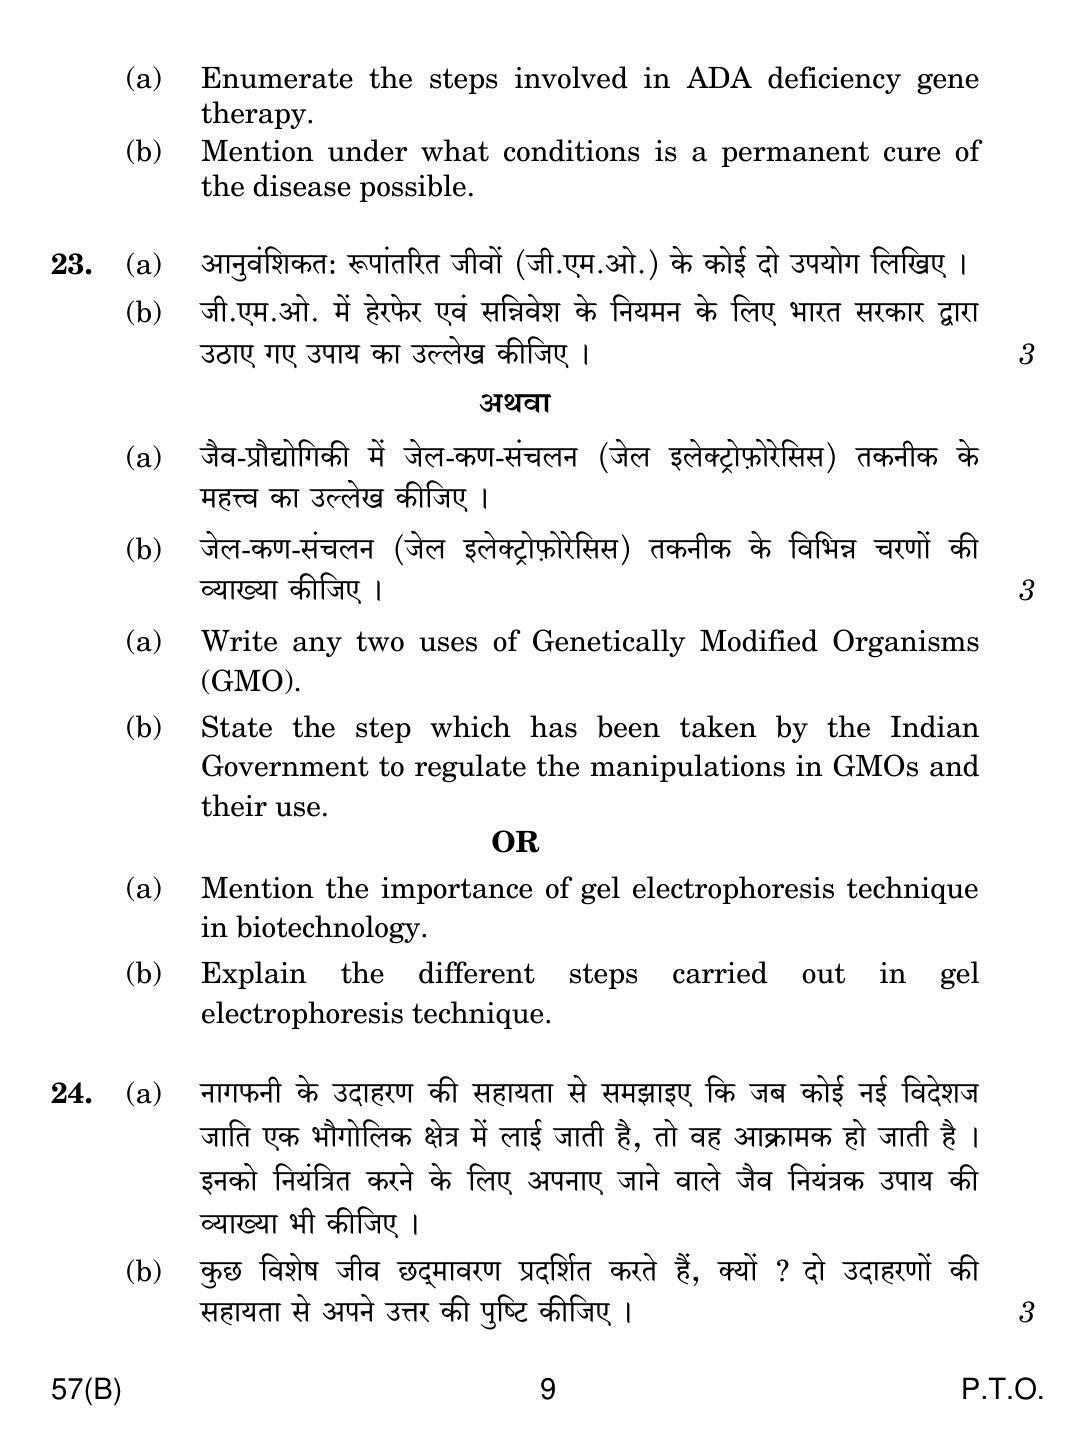 CBSE Class 12 57(B) Biology For Blind 2019 Question Paper - Page 9